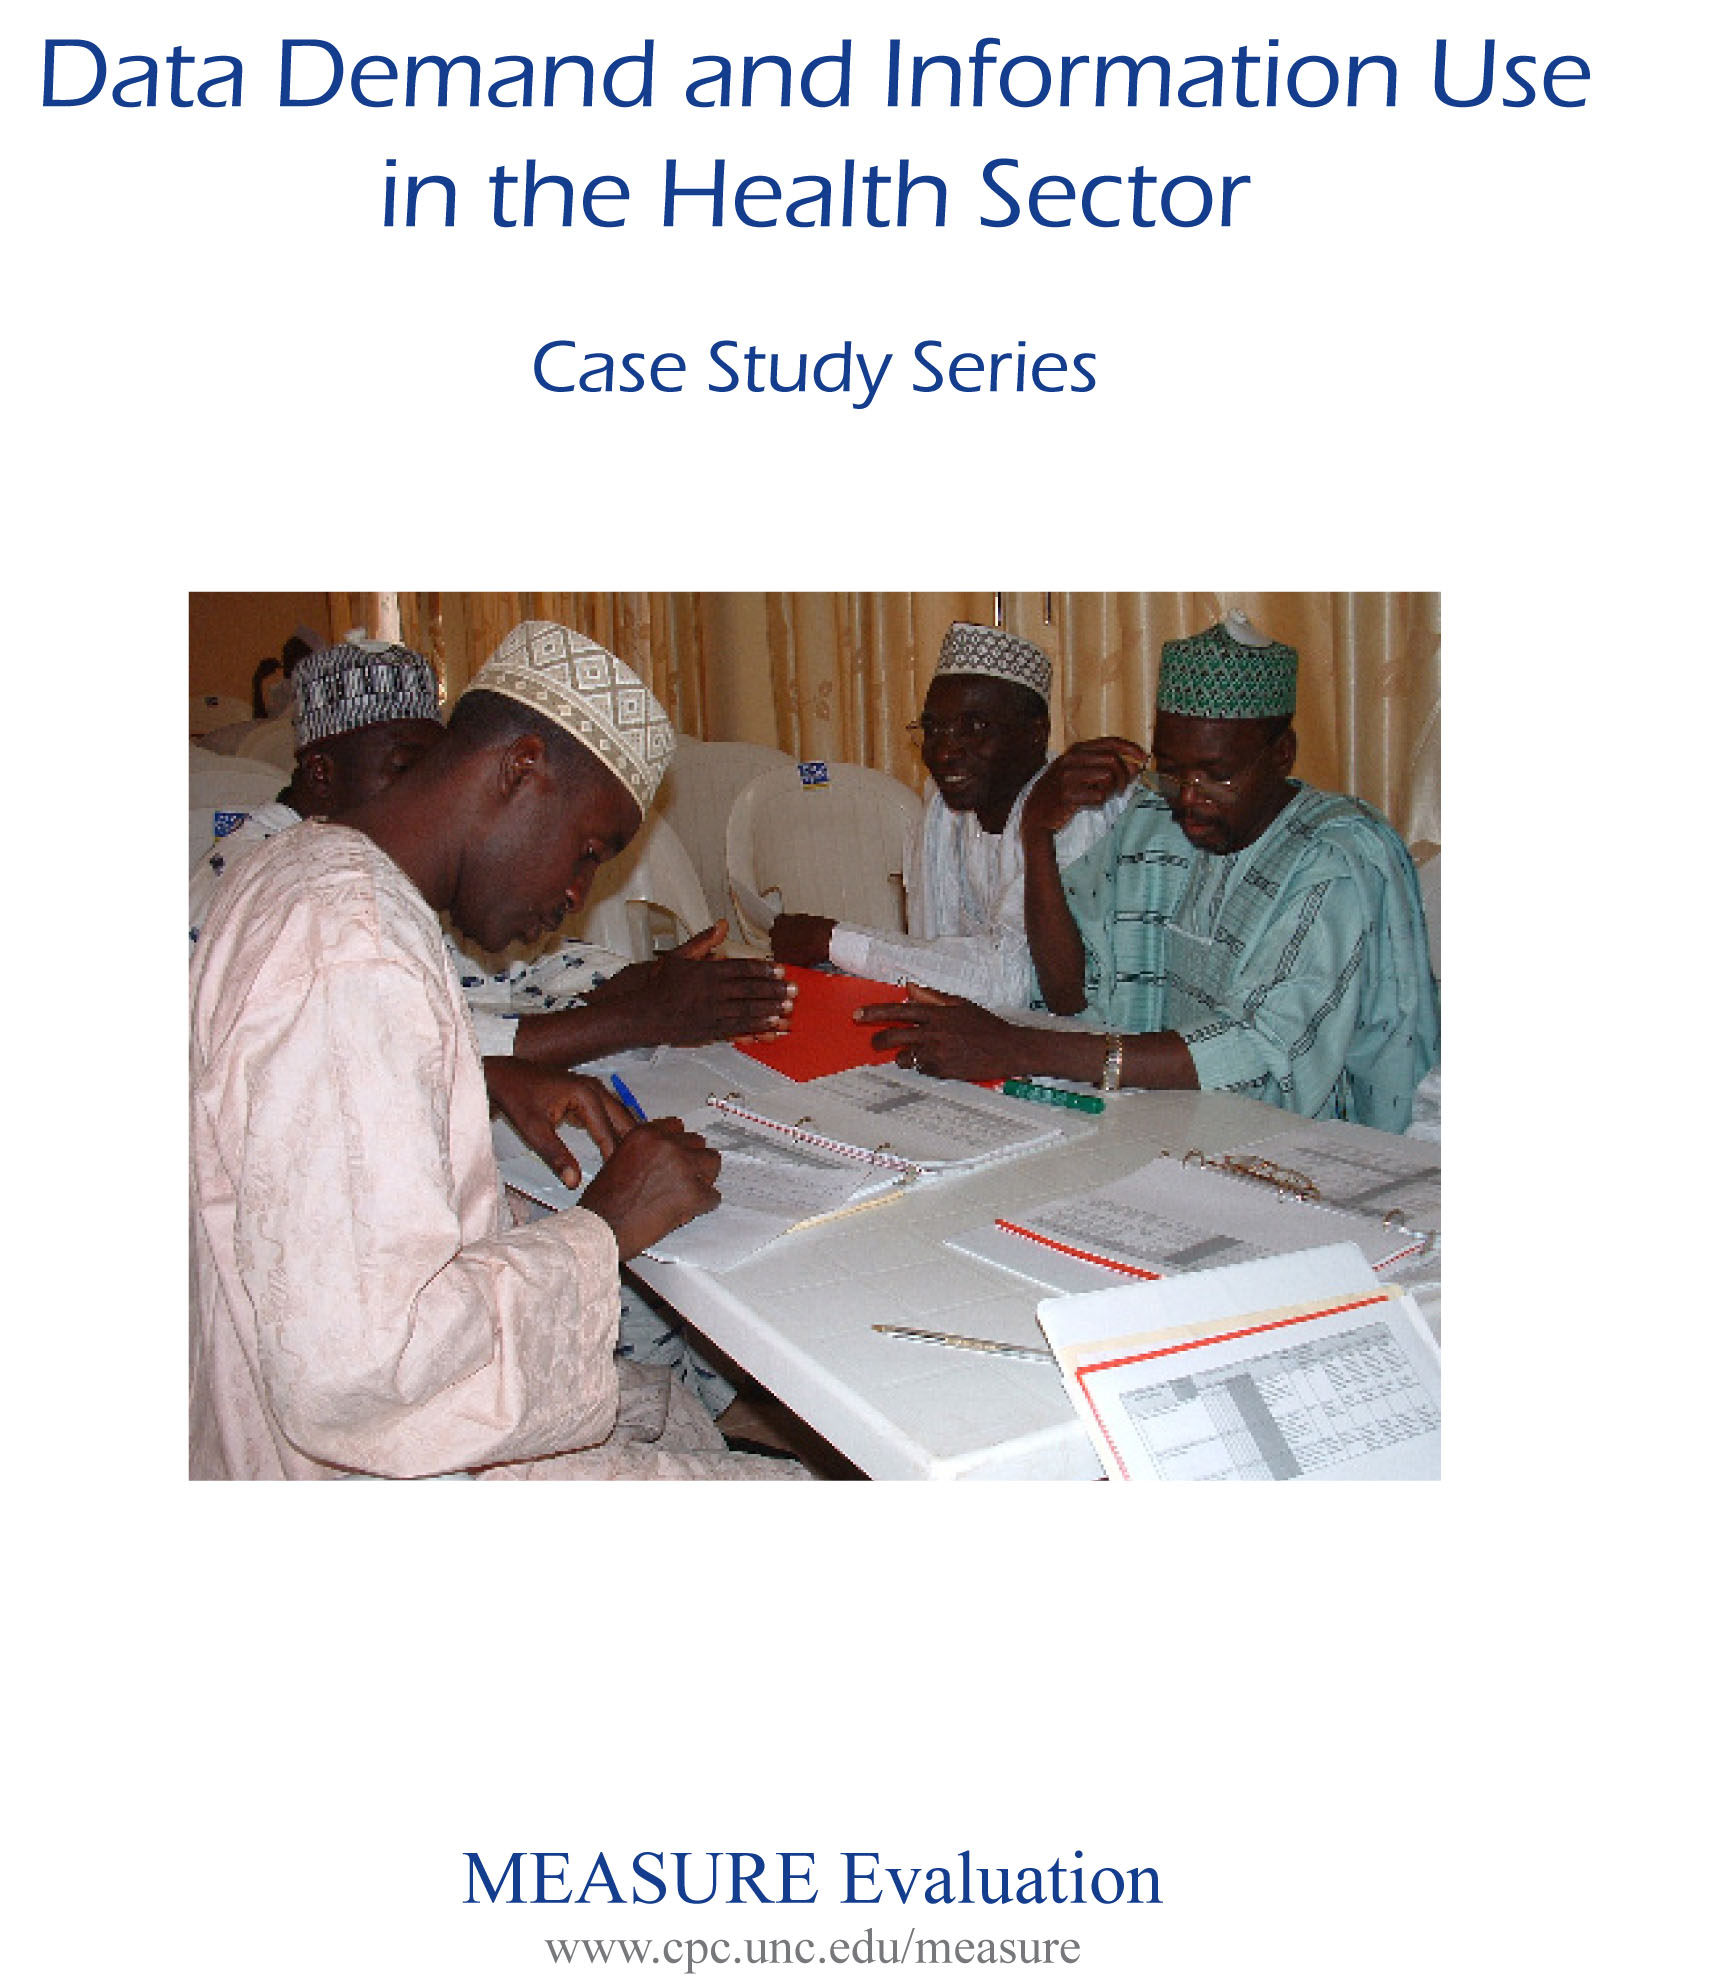 Data Demand and Information Use in the Health Sector: Case Study Series